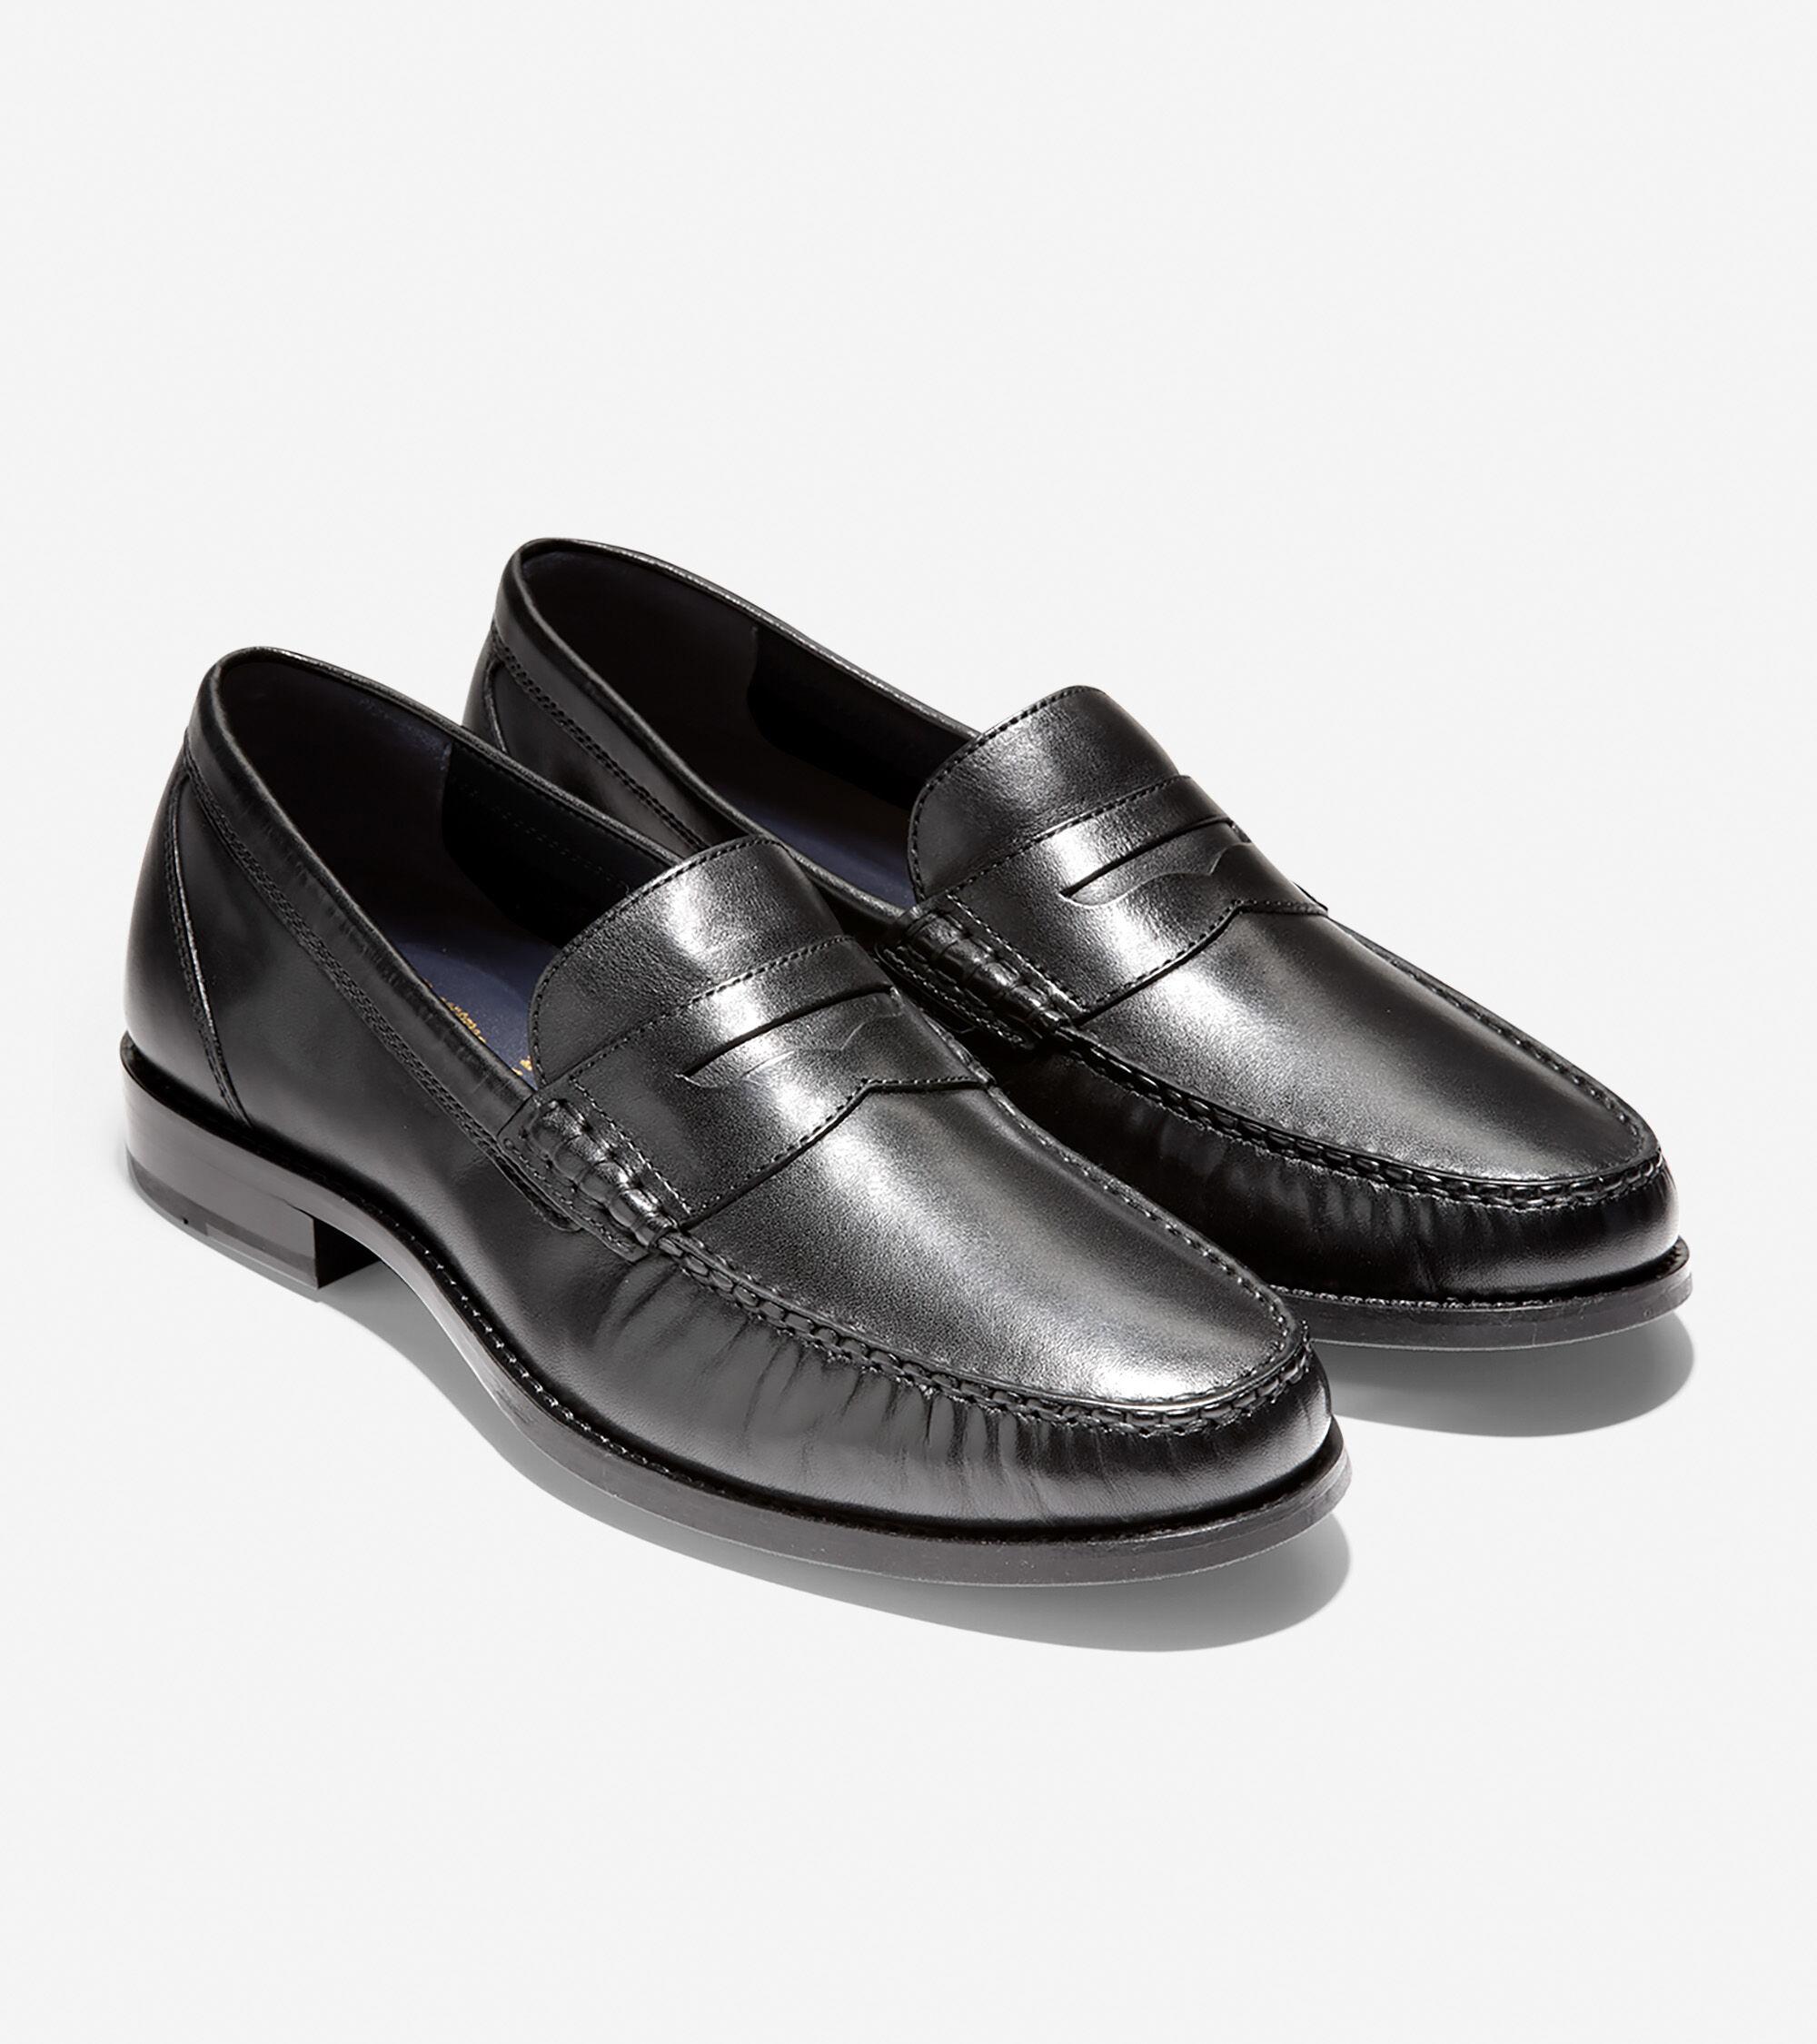 Cole Haan Leather Pinch Grand Casual Penny Loafer in Black for Men - Lyst